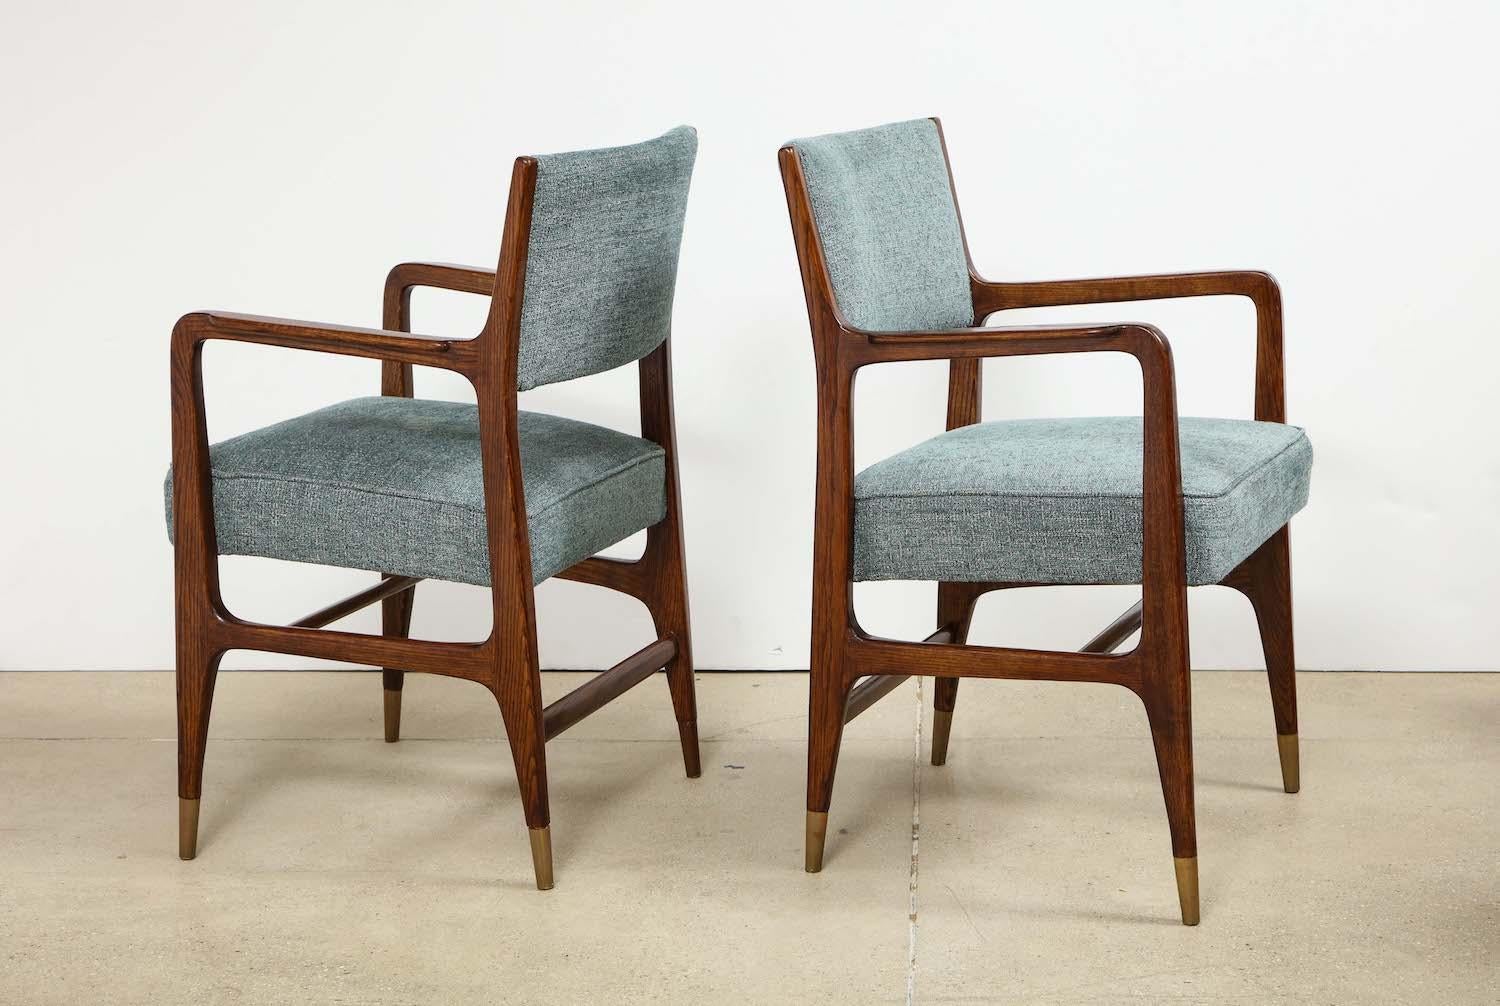 Rare pair of armchairs by Gio Ponti. Rare pair of armchairs by Gio Ponti. A rare variation of model #110, produced by Cassina. Open-grain ash chairs with upholstered seat and back and brass sabots.
  